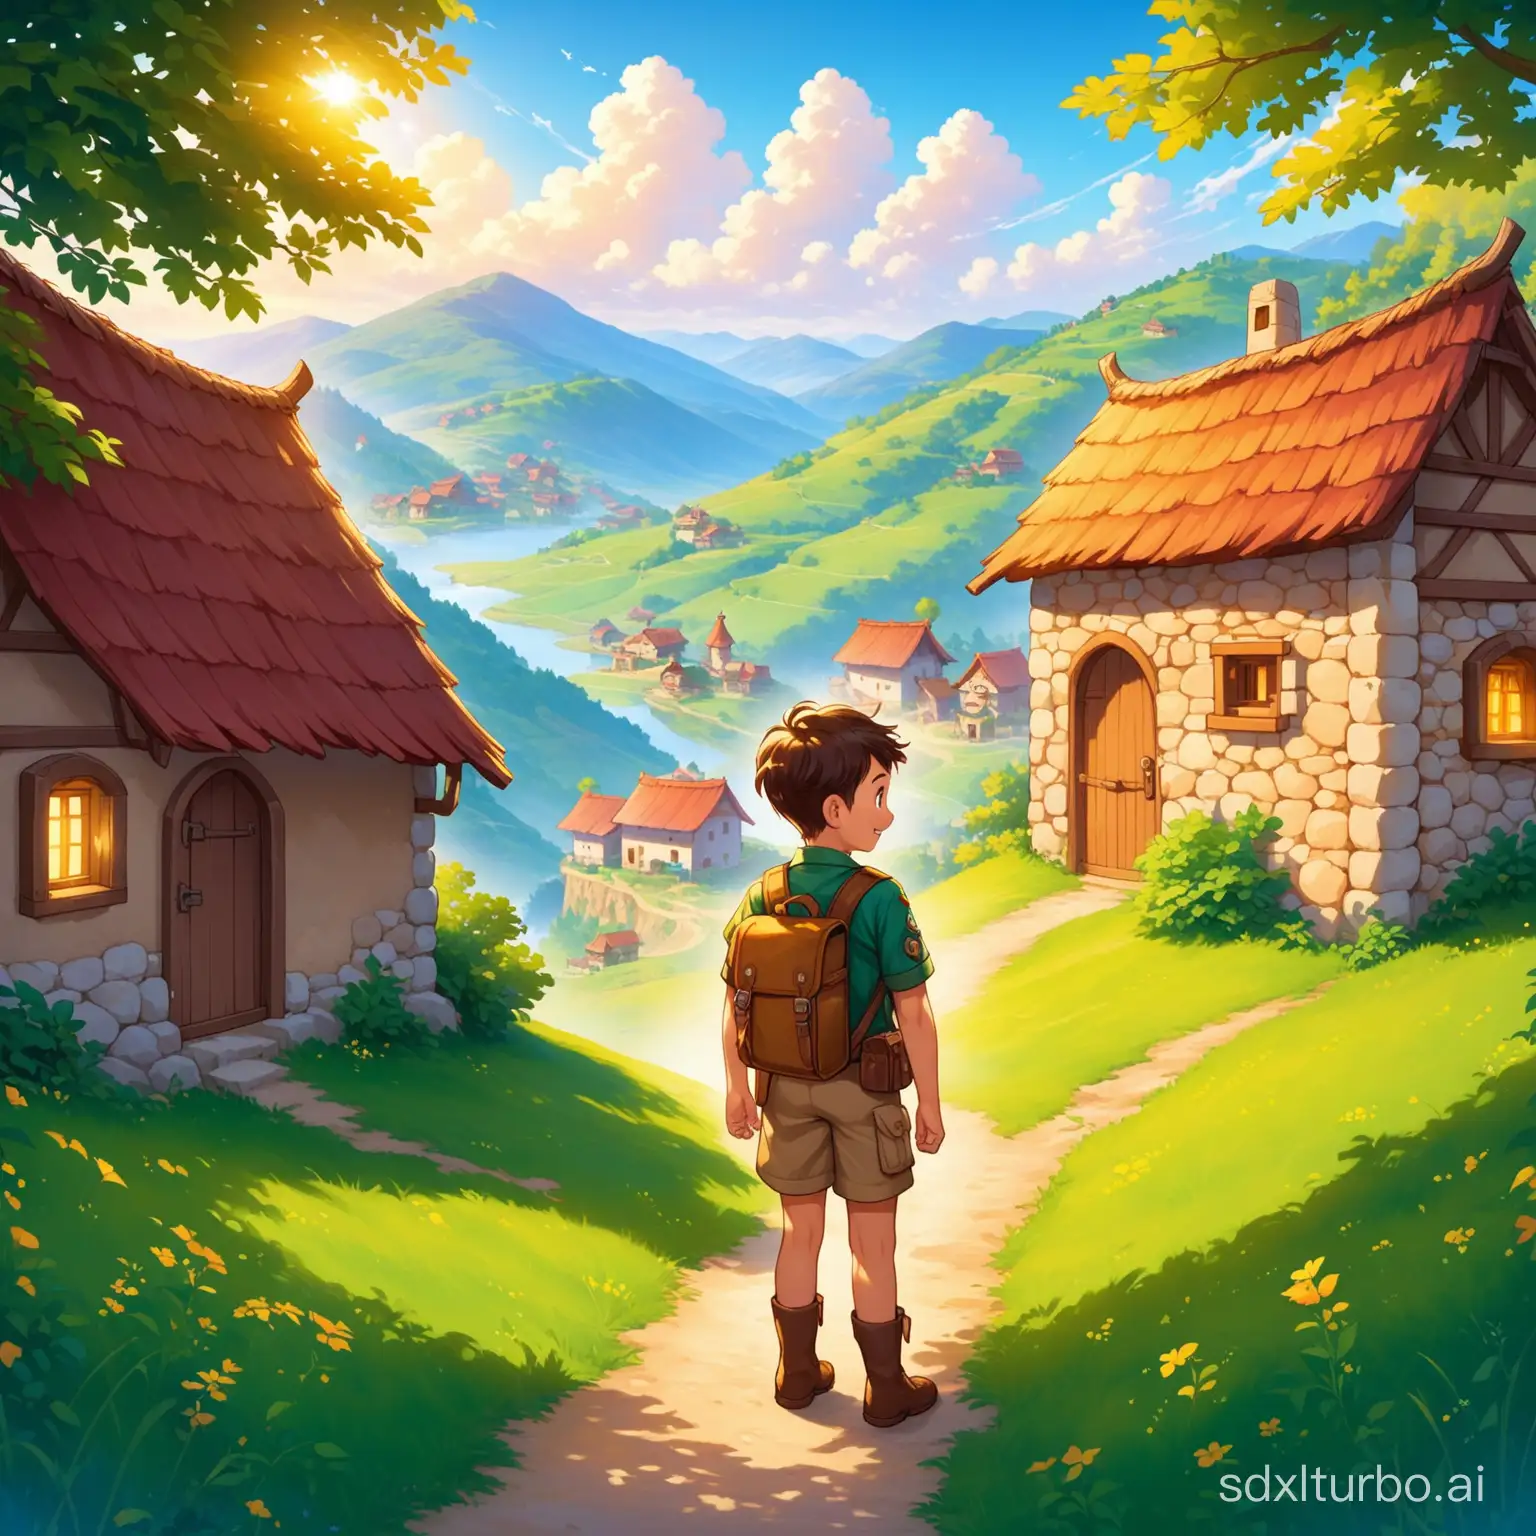 In a small village in the hills, we meet our brave boy explorer, Lucas.
He dreams of exciting adventures and legendary discoveries.